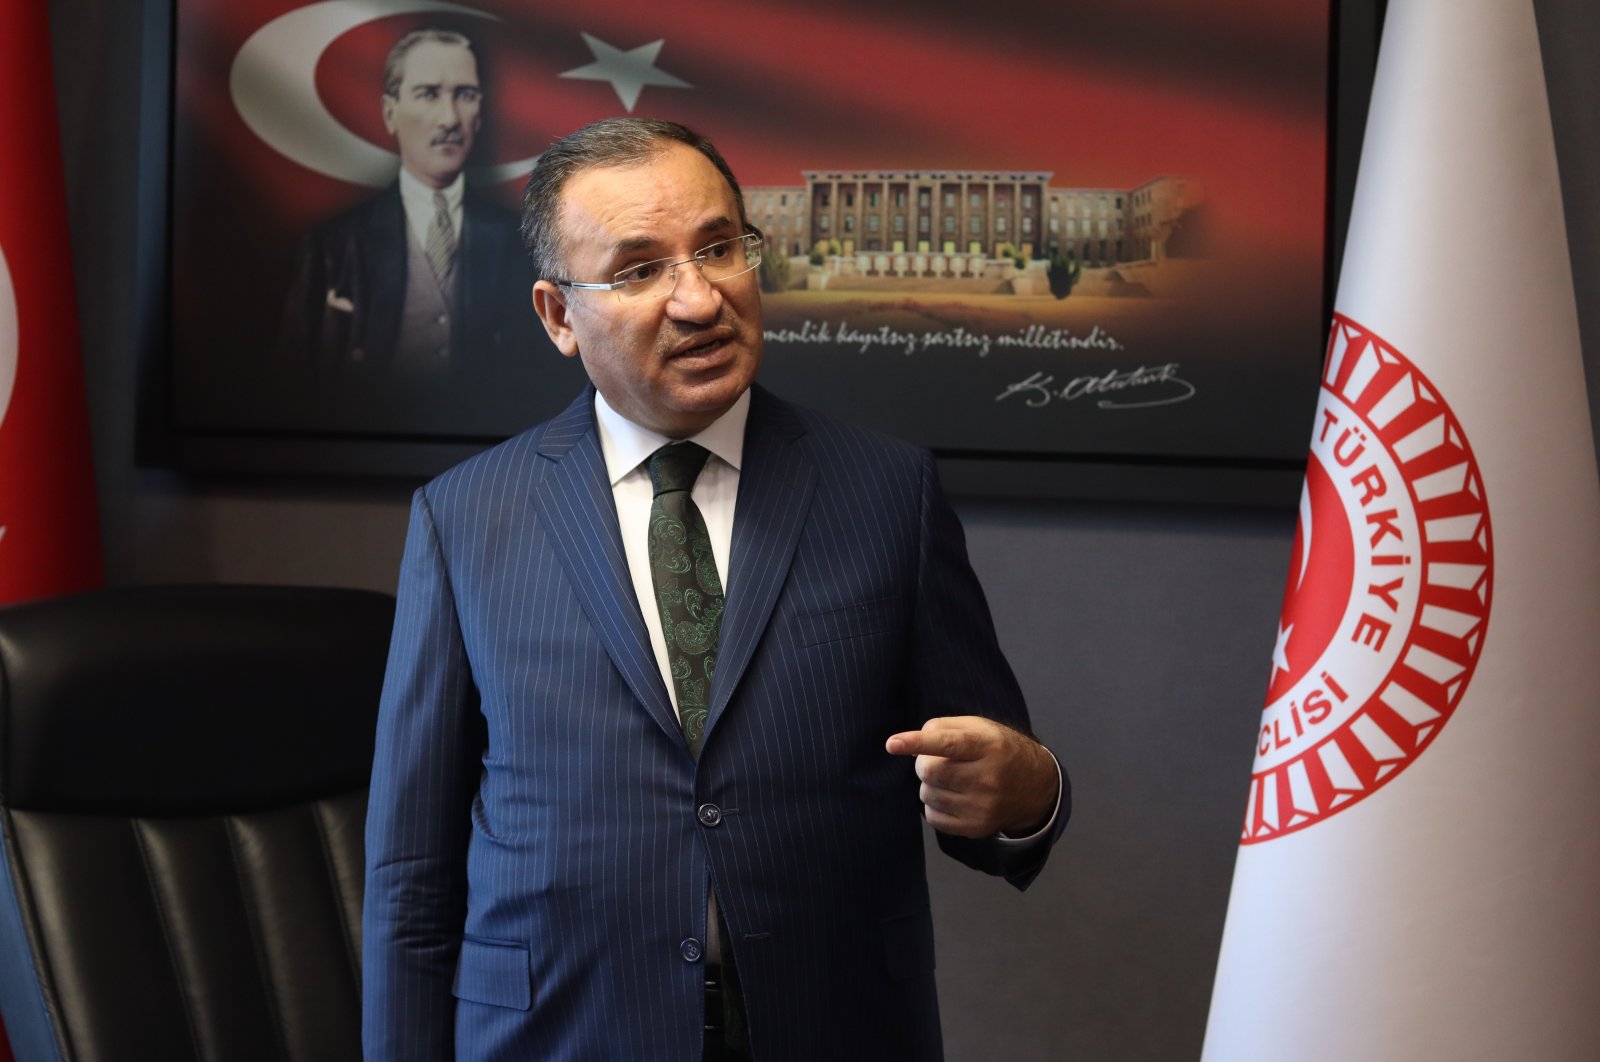 The head of the Turkish Grand National Assembly's (TBMM) Constitutional Commission, former Justice Minister Bekir Bozdağ, speaks during an interview with Daily Sabah, Ankara, Turkey, Feb. 24, 2021. (Photo by Daily Sabah)